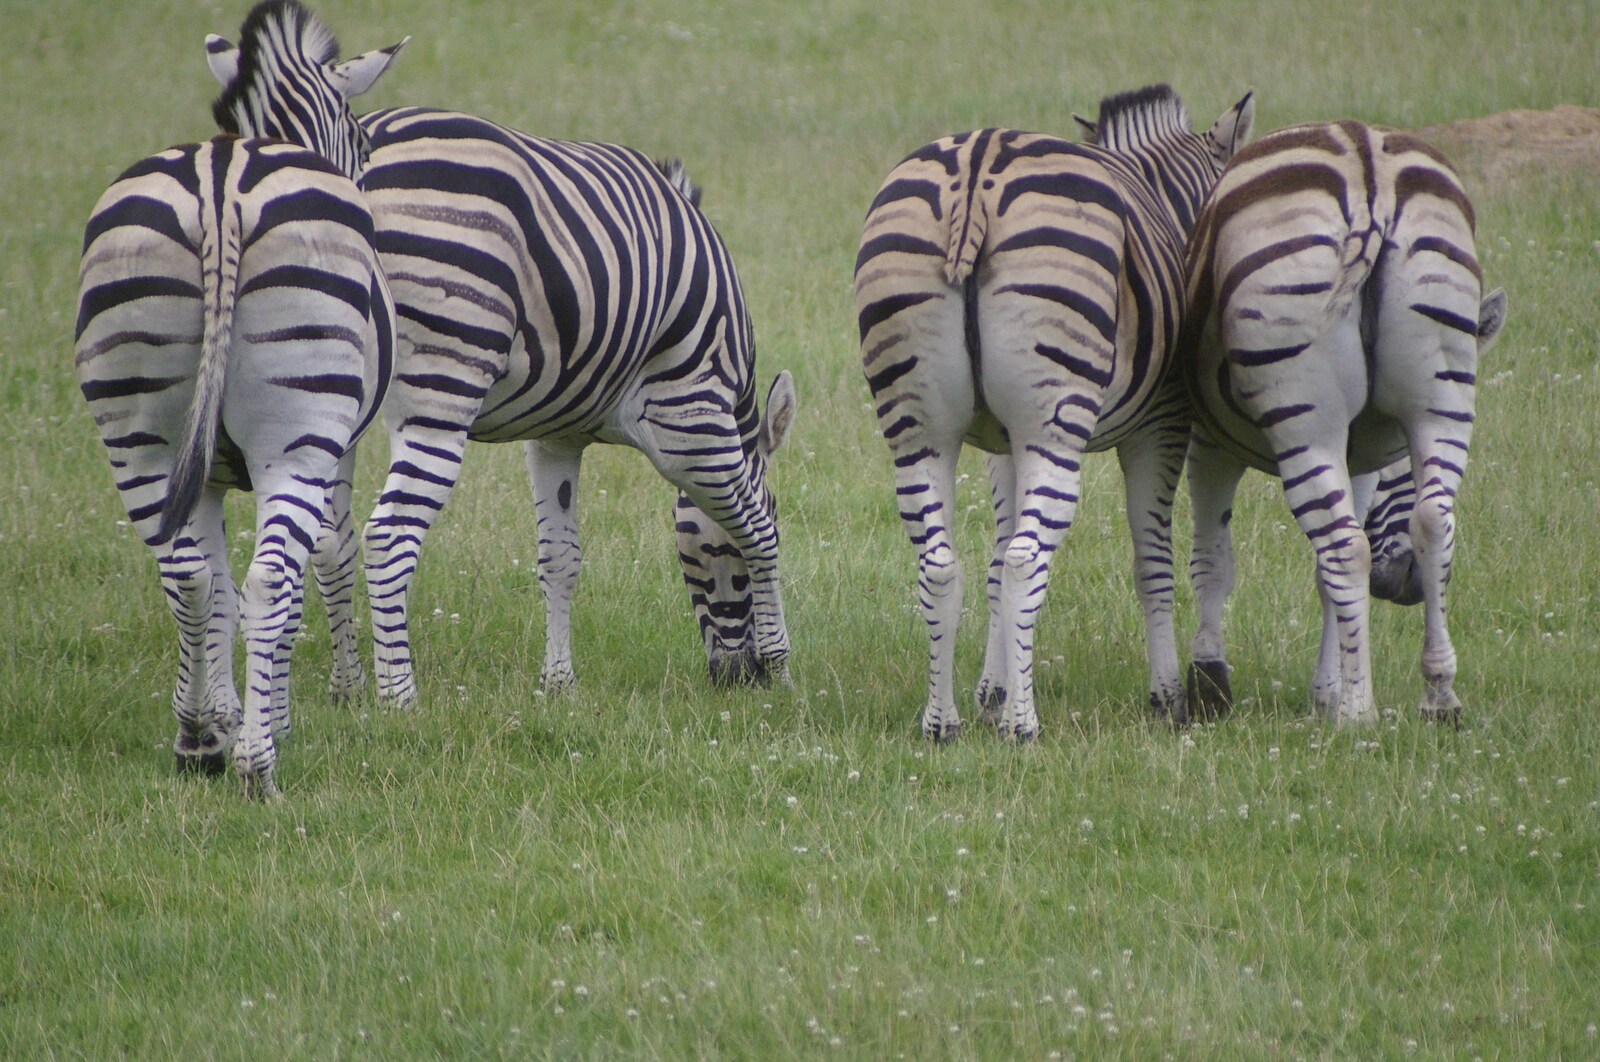 Some slightly browner zebra from The BBs in a Garden, and a Qualcomm Safari, Woburn, Bedfordshire - 22nd July 2007